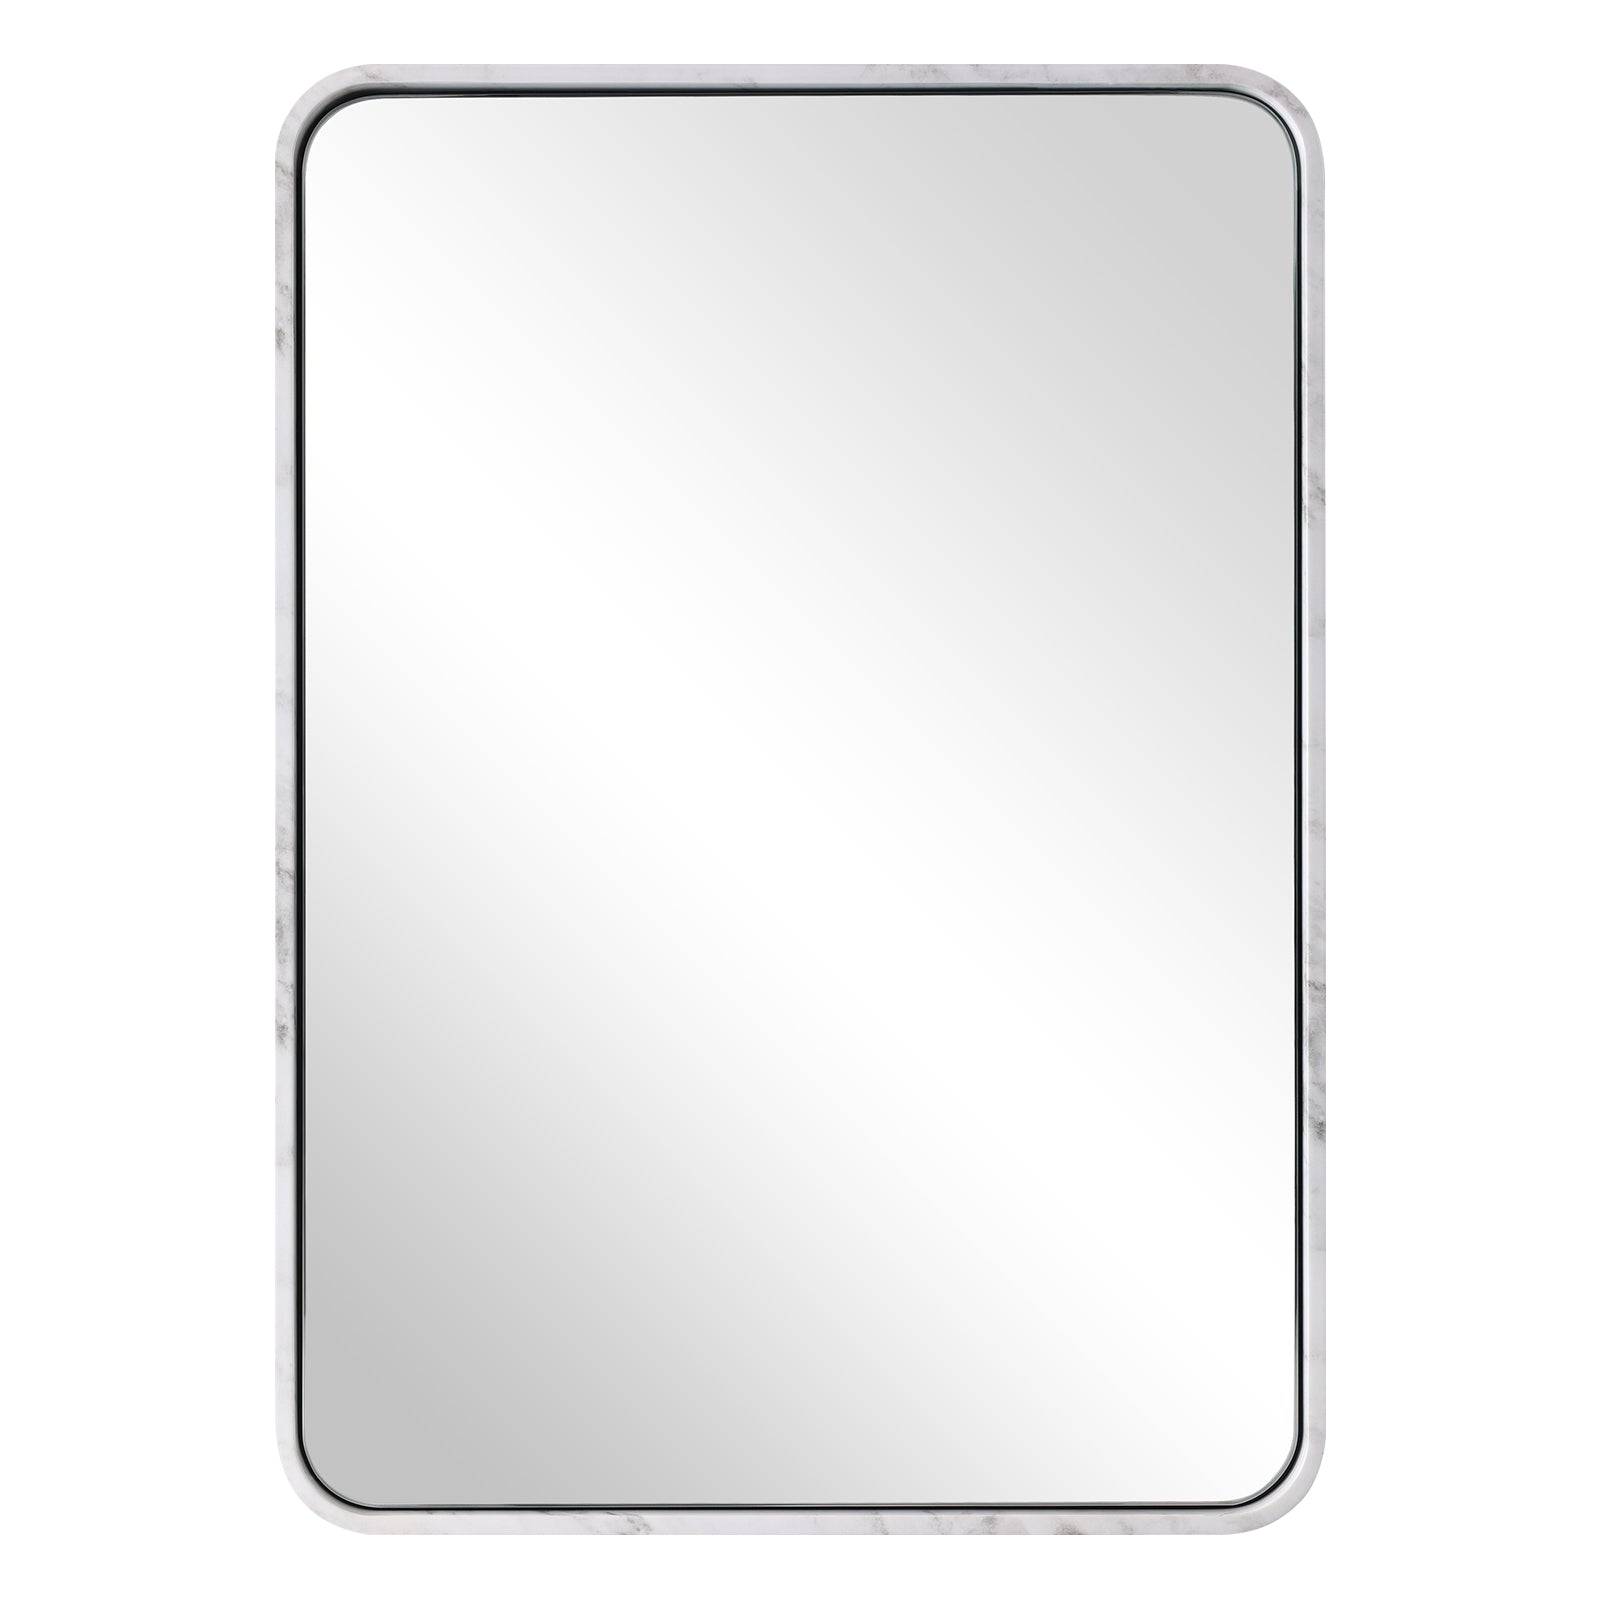 Contemporary Marble Framed Rectangle Wall Mirror for Bathroom Vanity